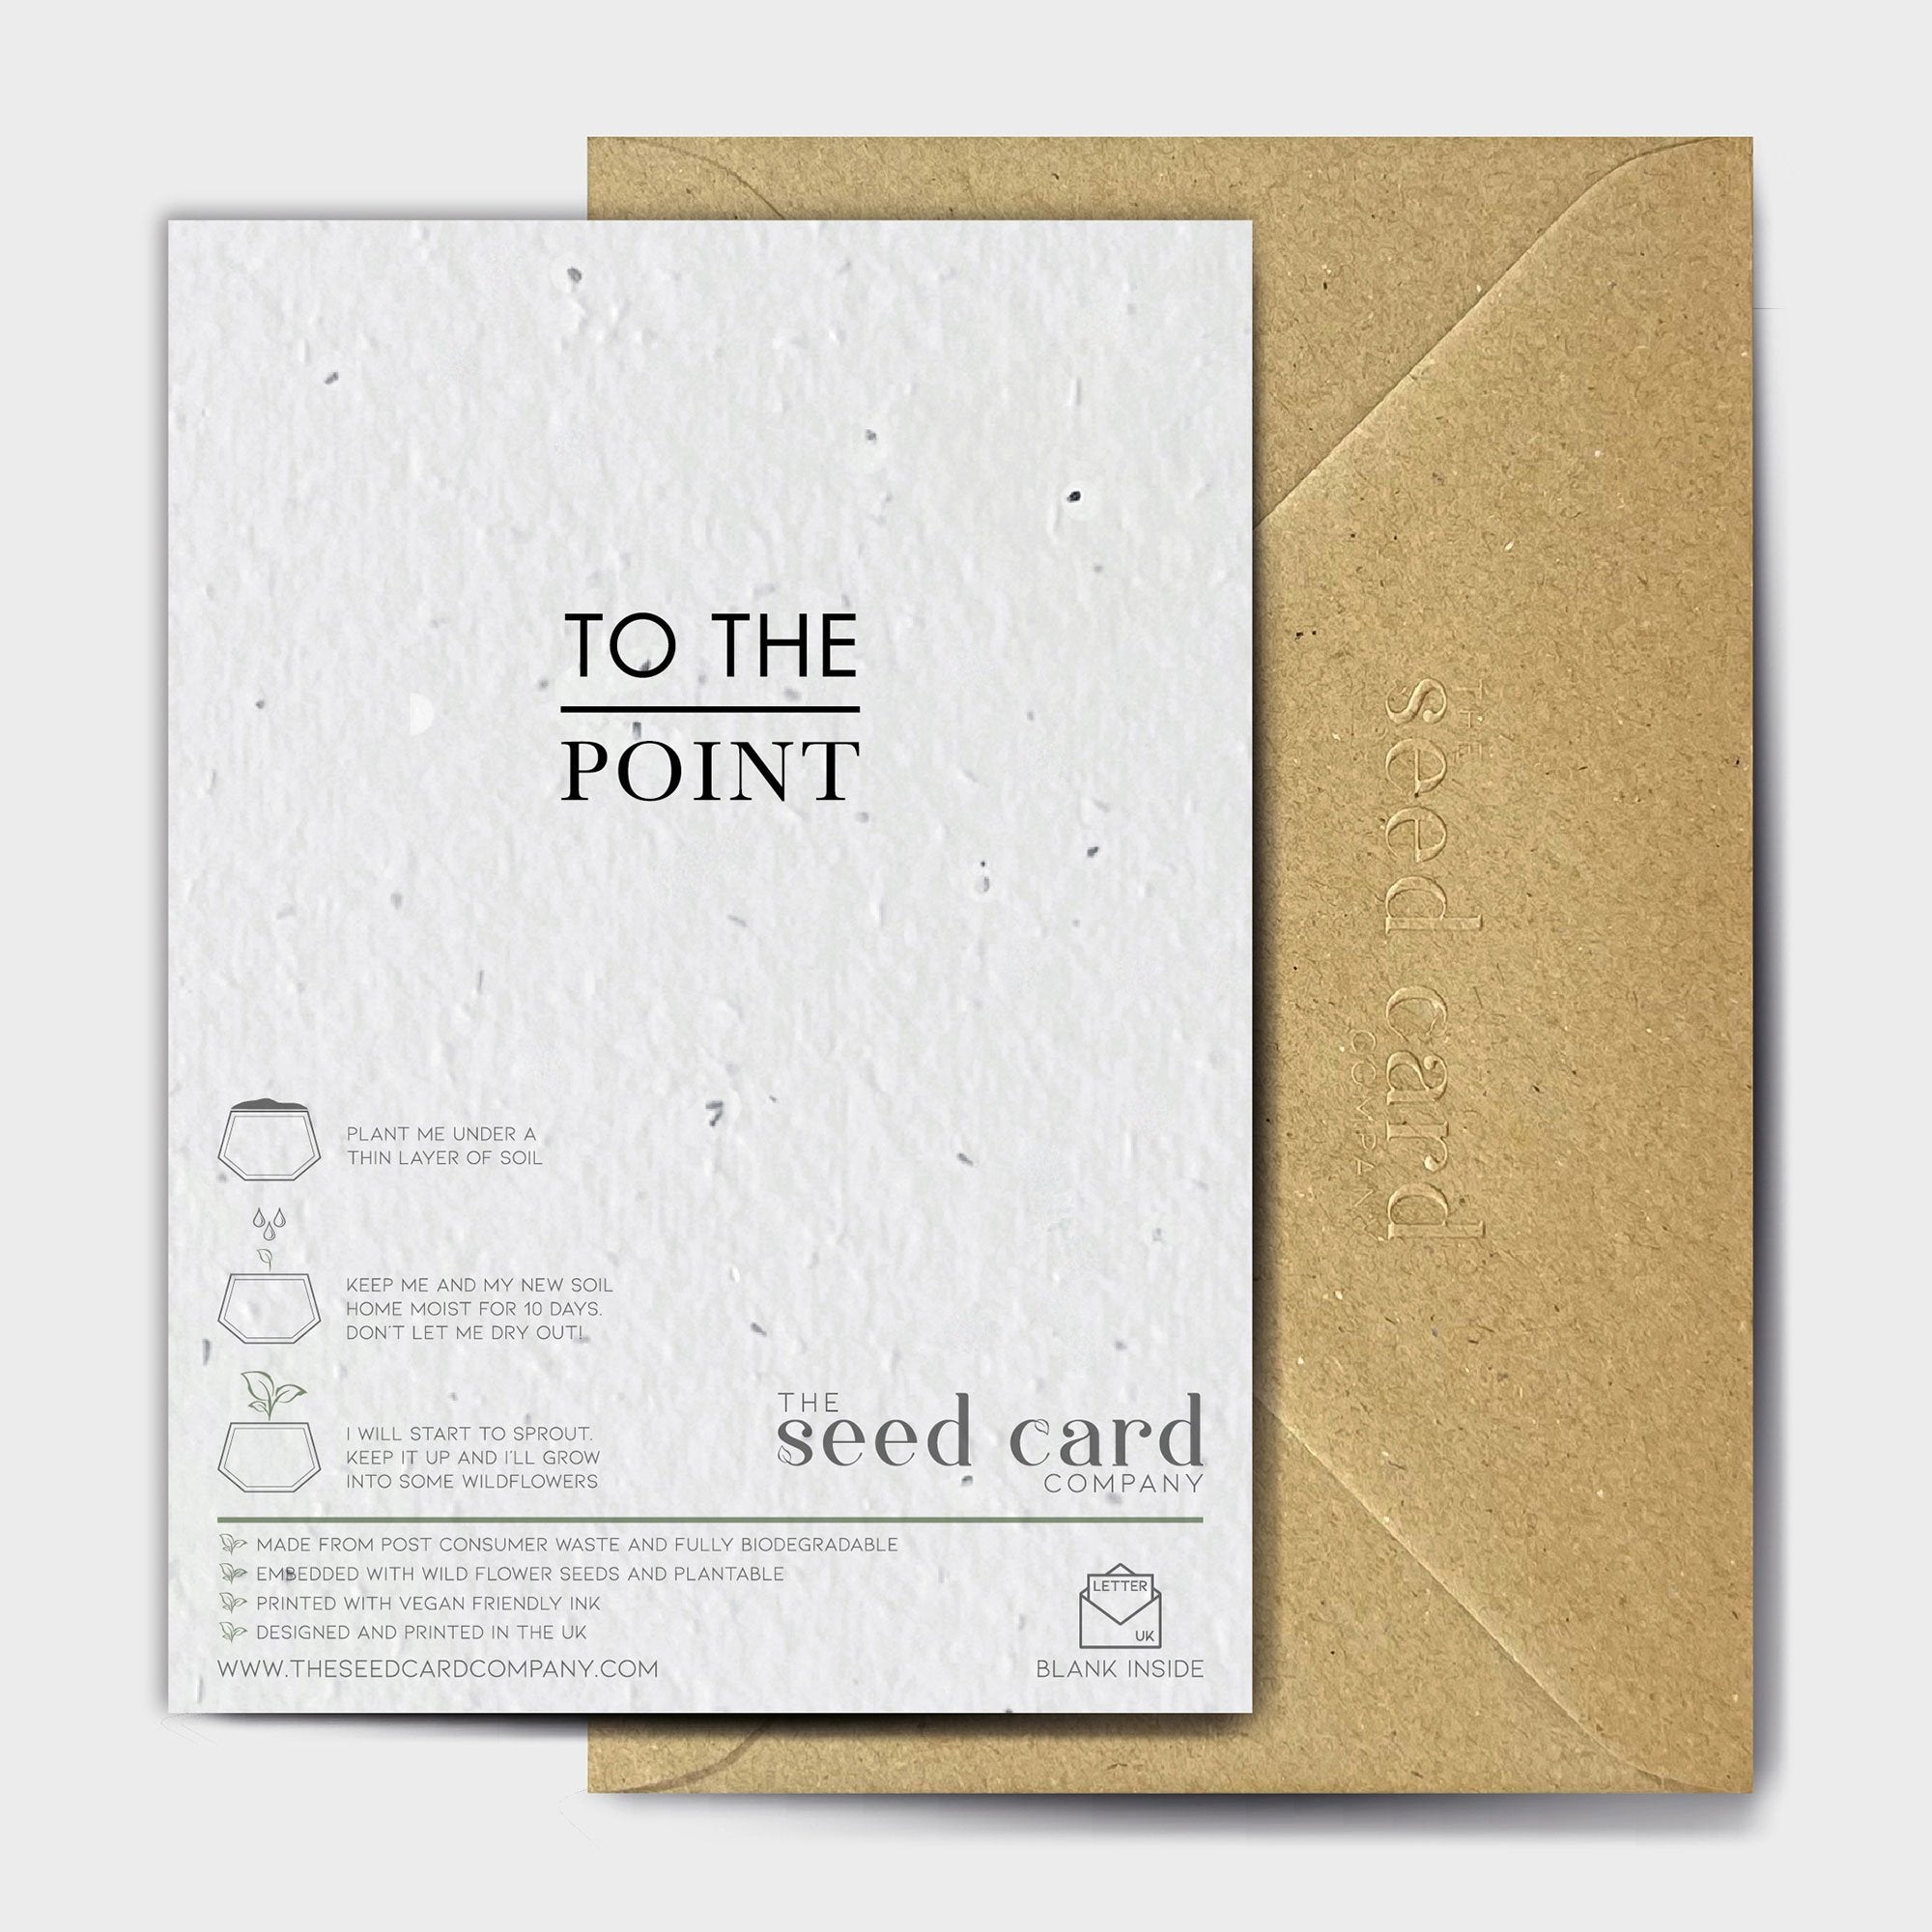 Shop online Don't Throw This Away - 100% biodegradable seed-embedded cards Shop -The Seed Card Company